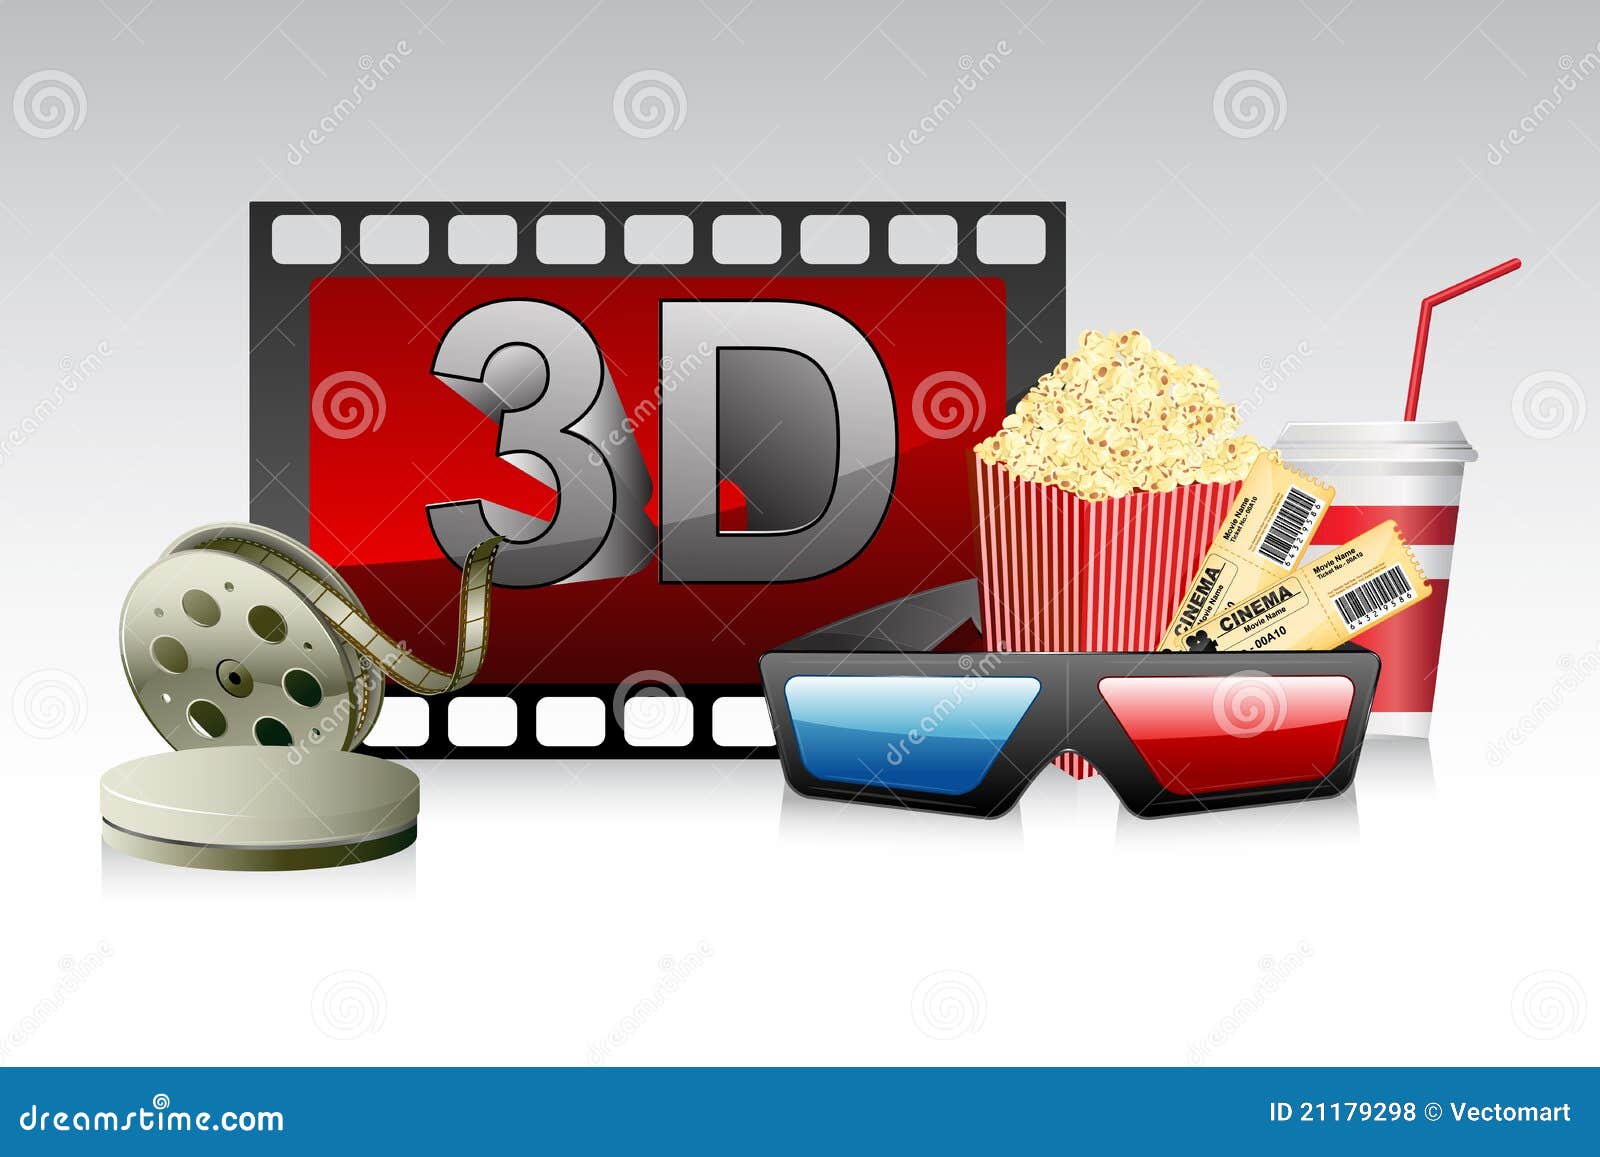 3d Glasses with Film Strip stock vector. Illustration of optical - 21179298